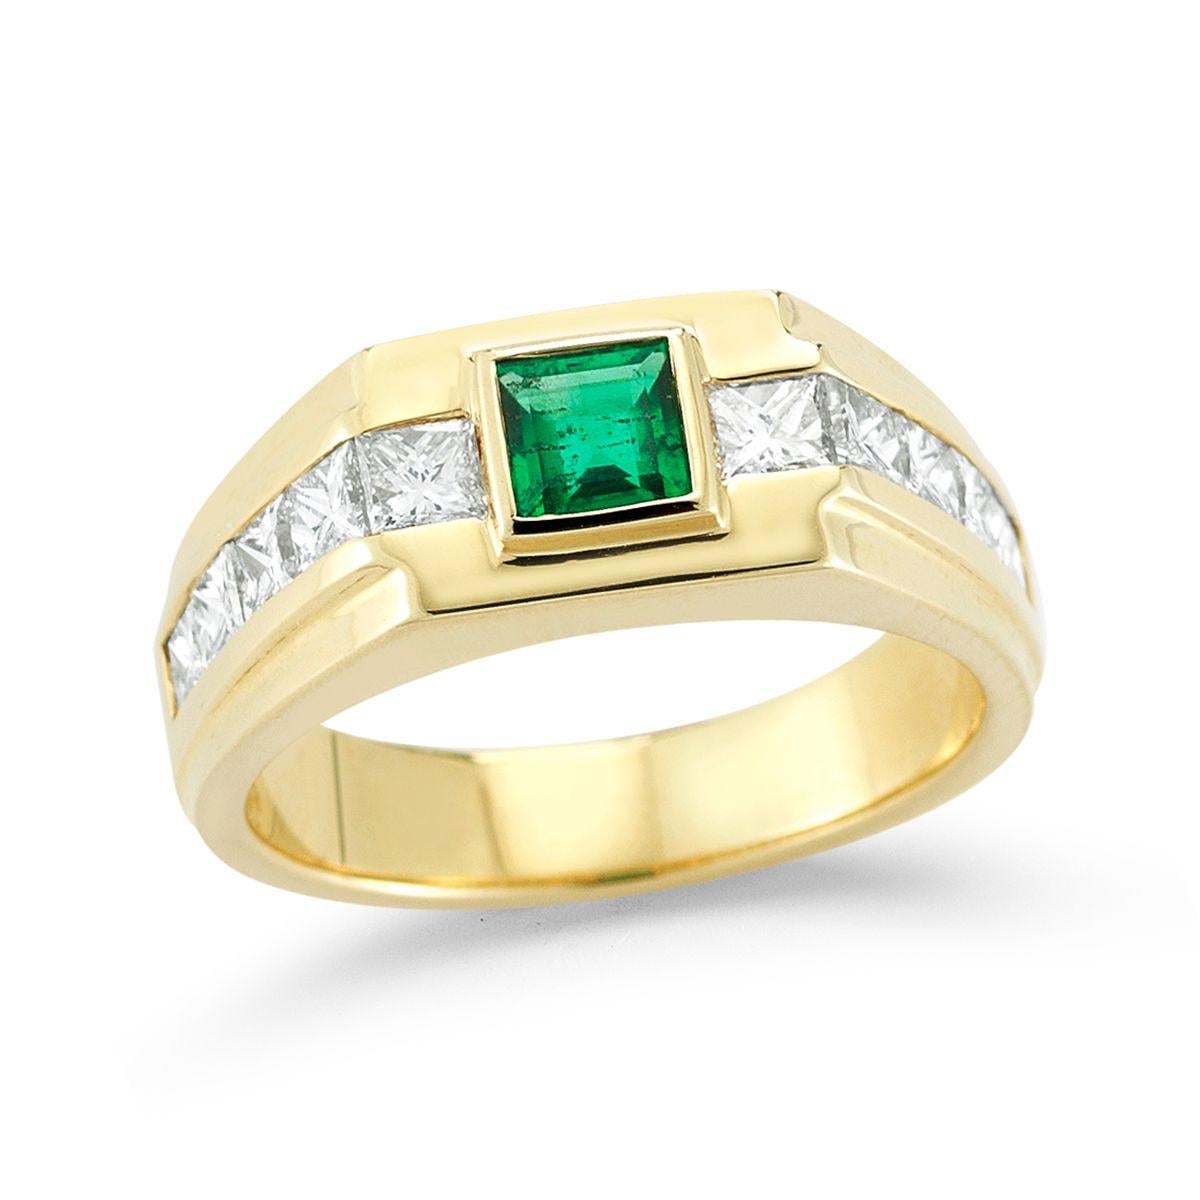 EMERALD AND DIAMOND RING
A clean and contemporary setting for a mens band.
Item: # 02159
Metal: 14k Y
Color Weight: 0.60 ct.
Diamond Weight: 1.70 ct.